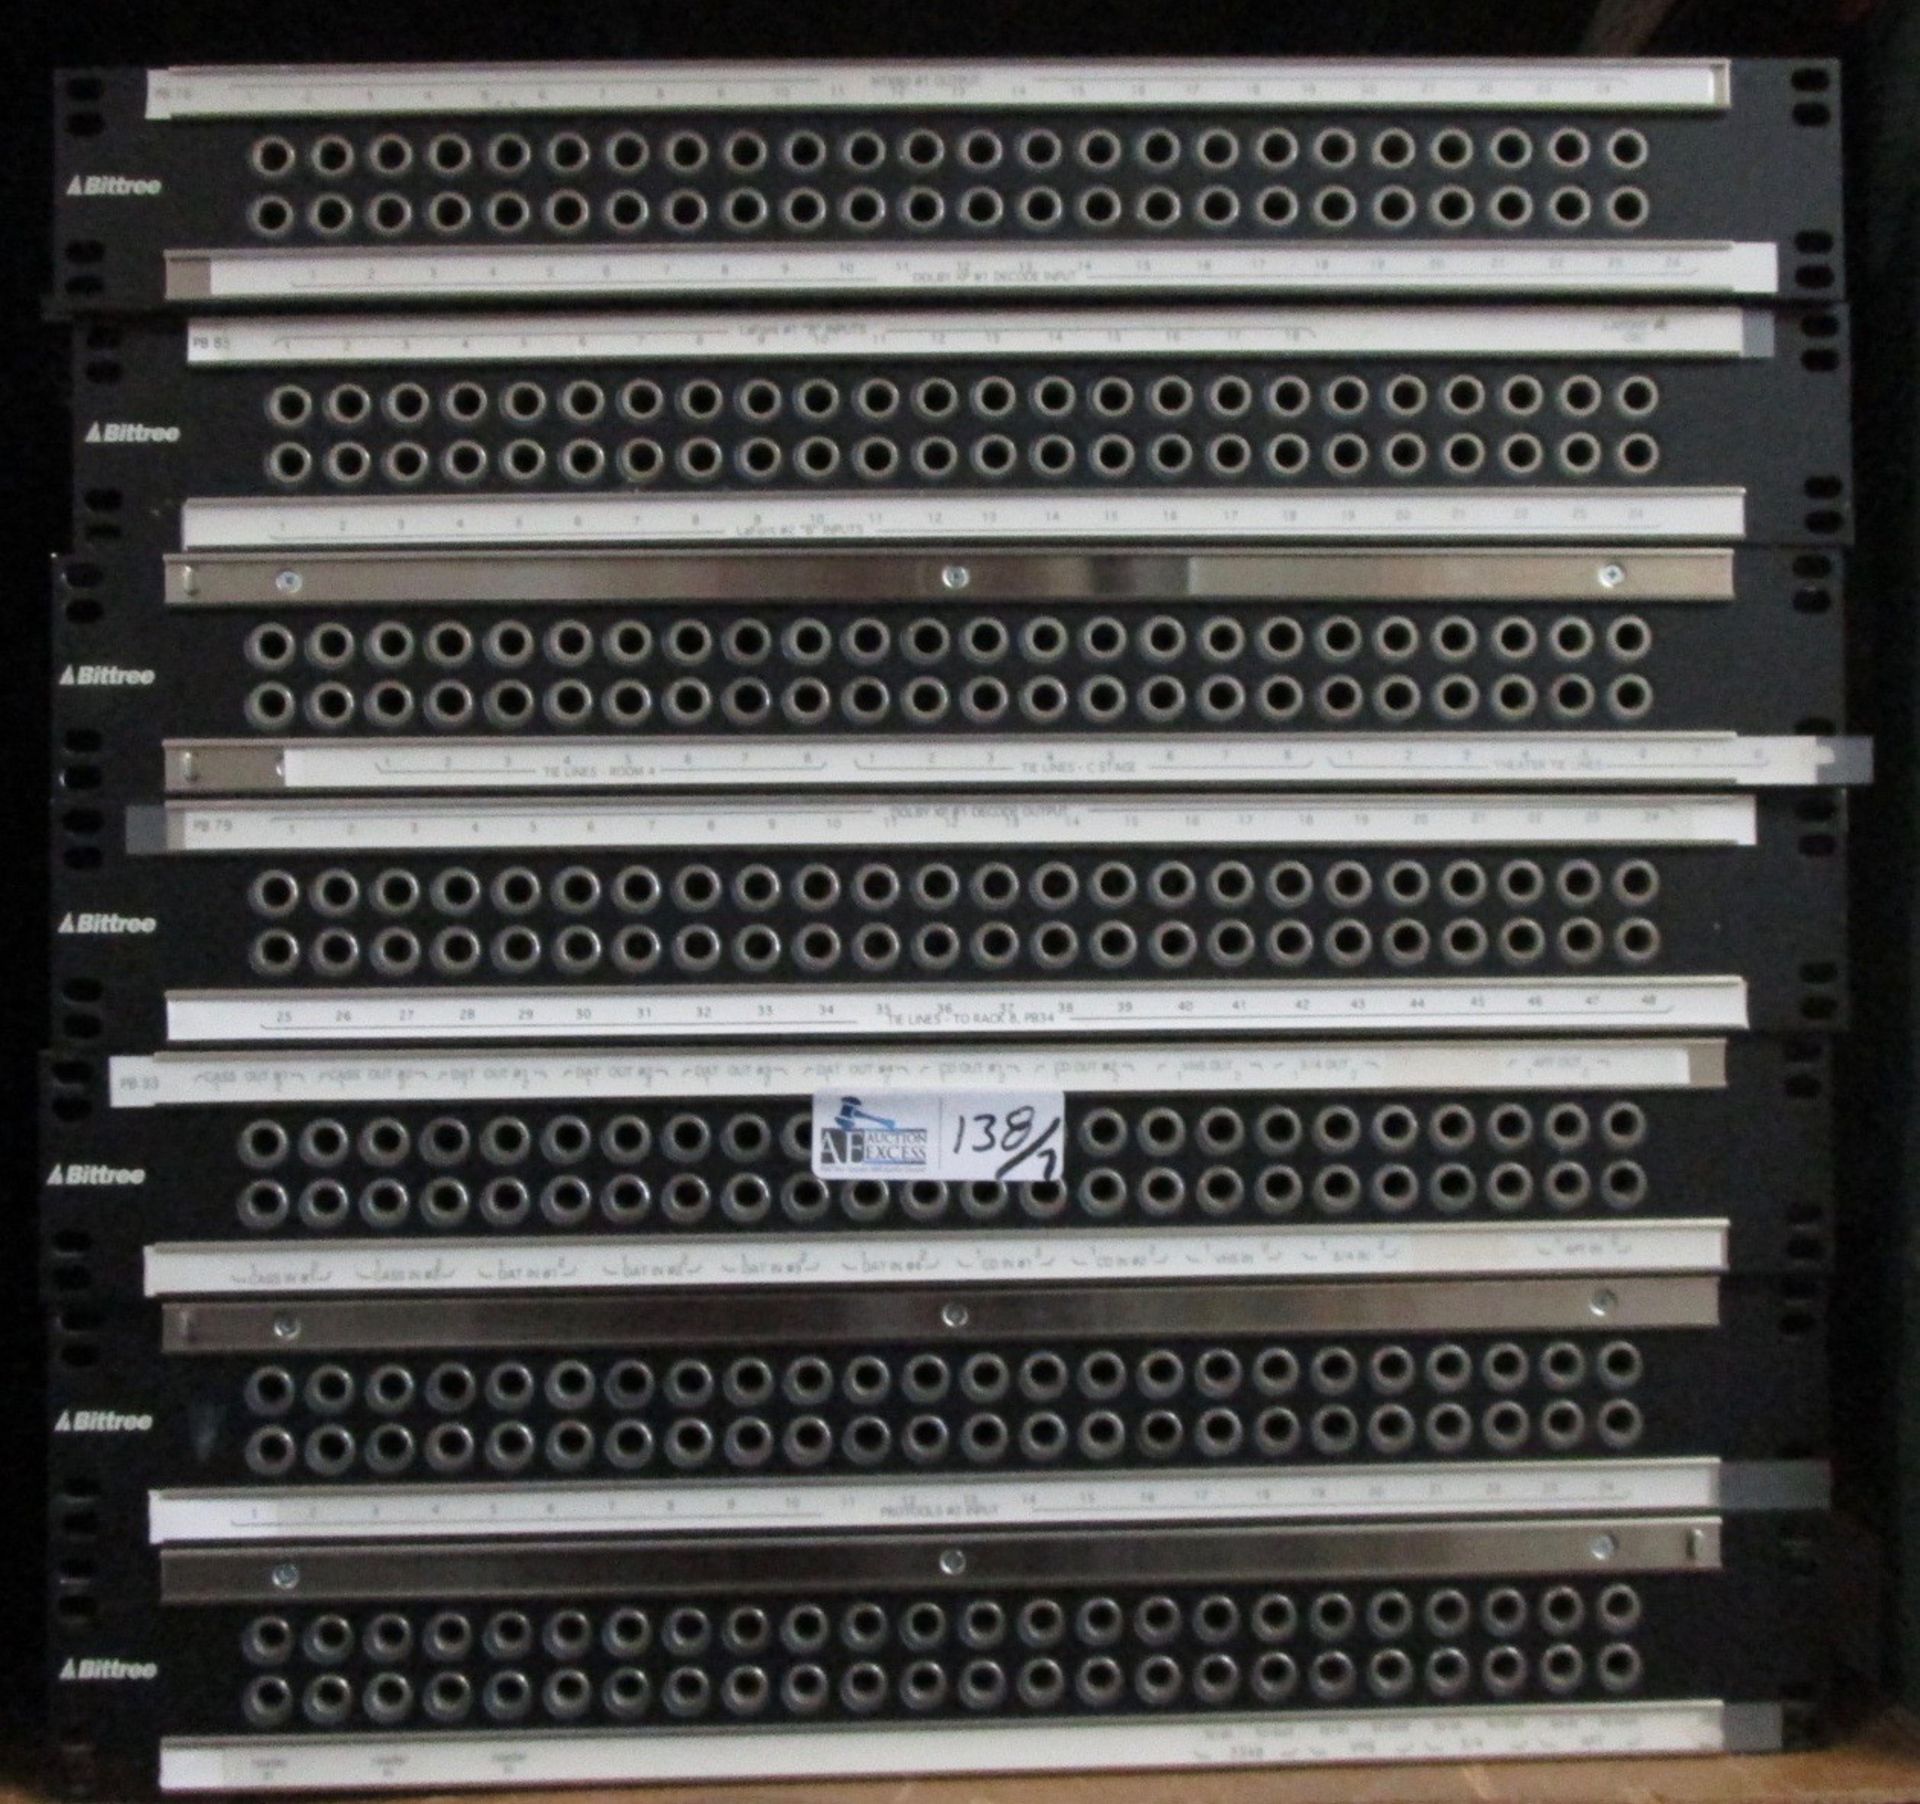 LOT OF 7 BITTREE PATCHBAYS